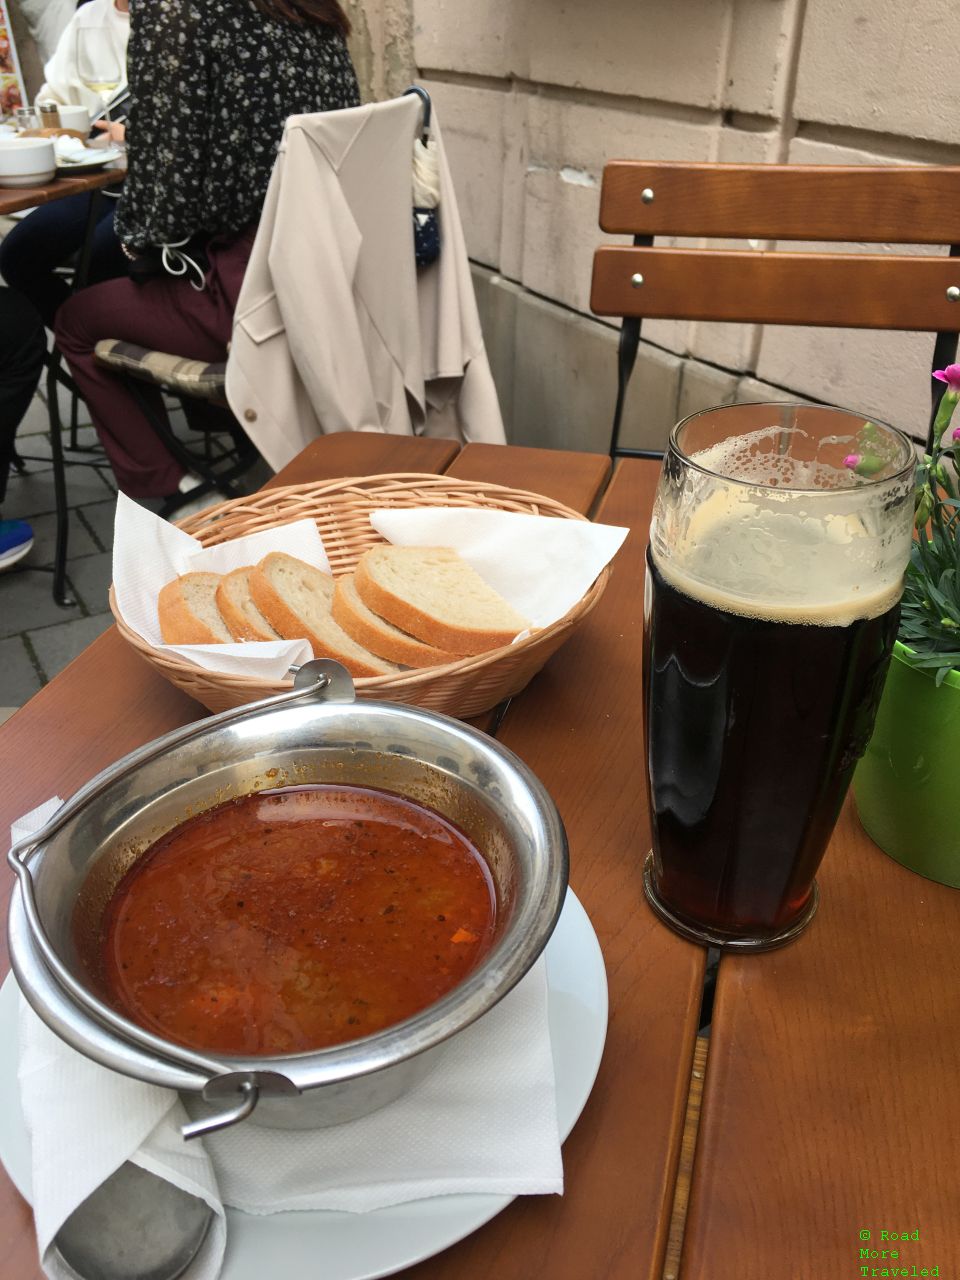 Walking Tour of Bratislava Castle and Old Town Bratislava - goulash and beer